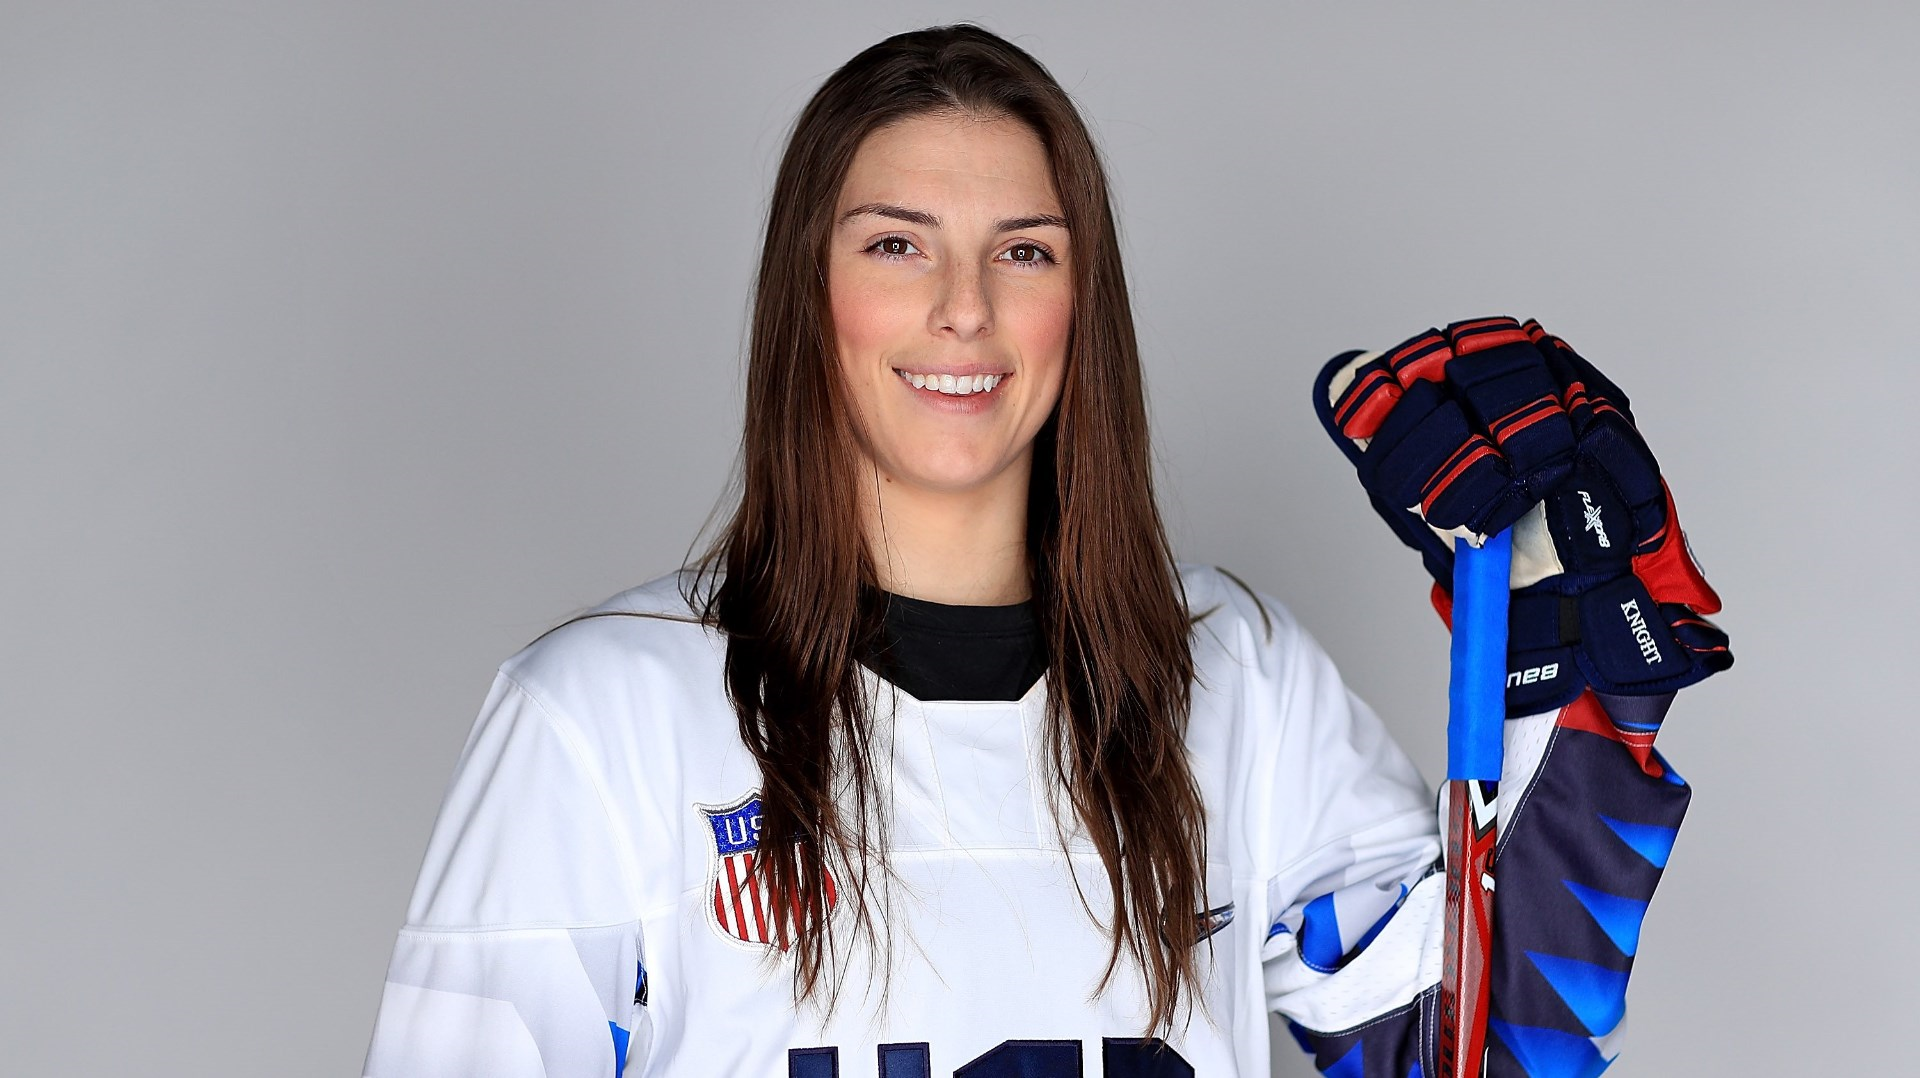 Ice Hockey player Hilary Knight poses for a portrait.